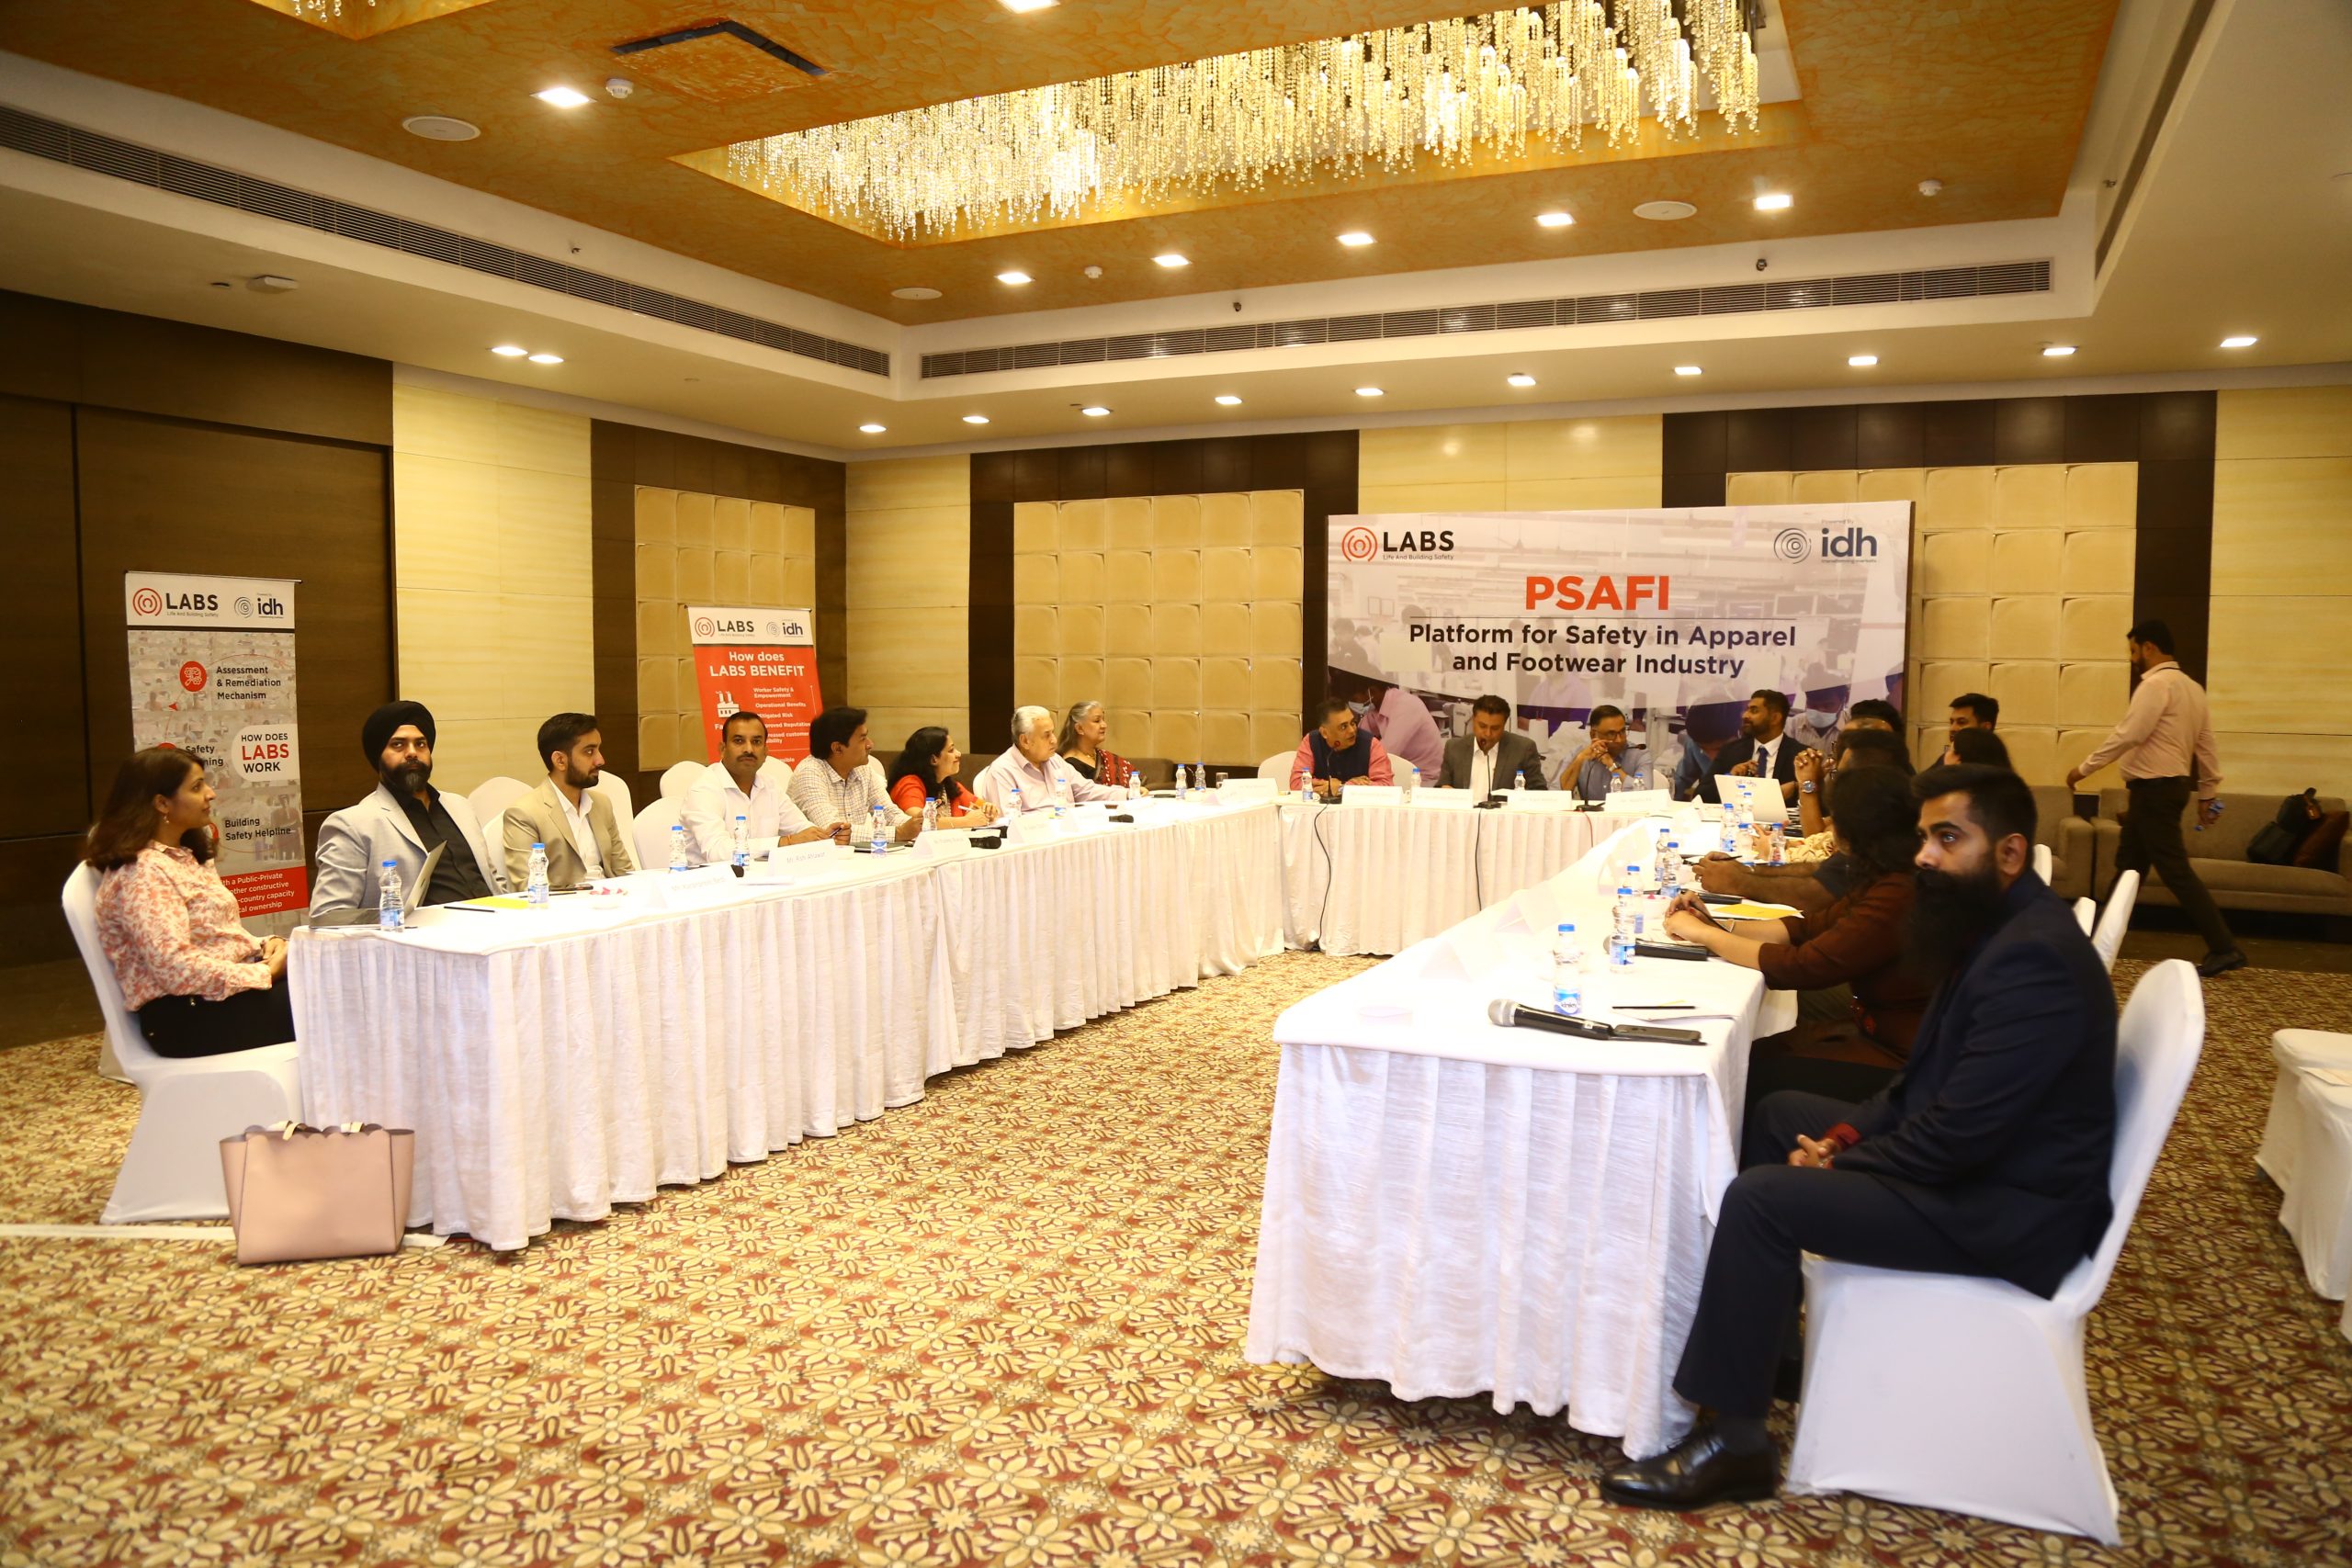 LABS Initiative Launches PSAFI: A Joint Platform for Safety in the Apparel and Footwear Industry in India